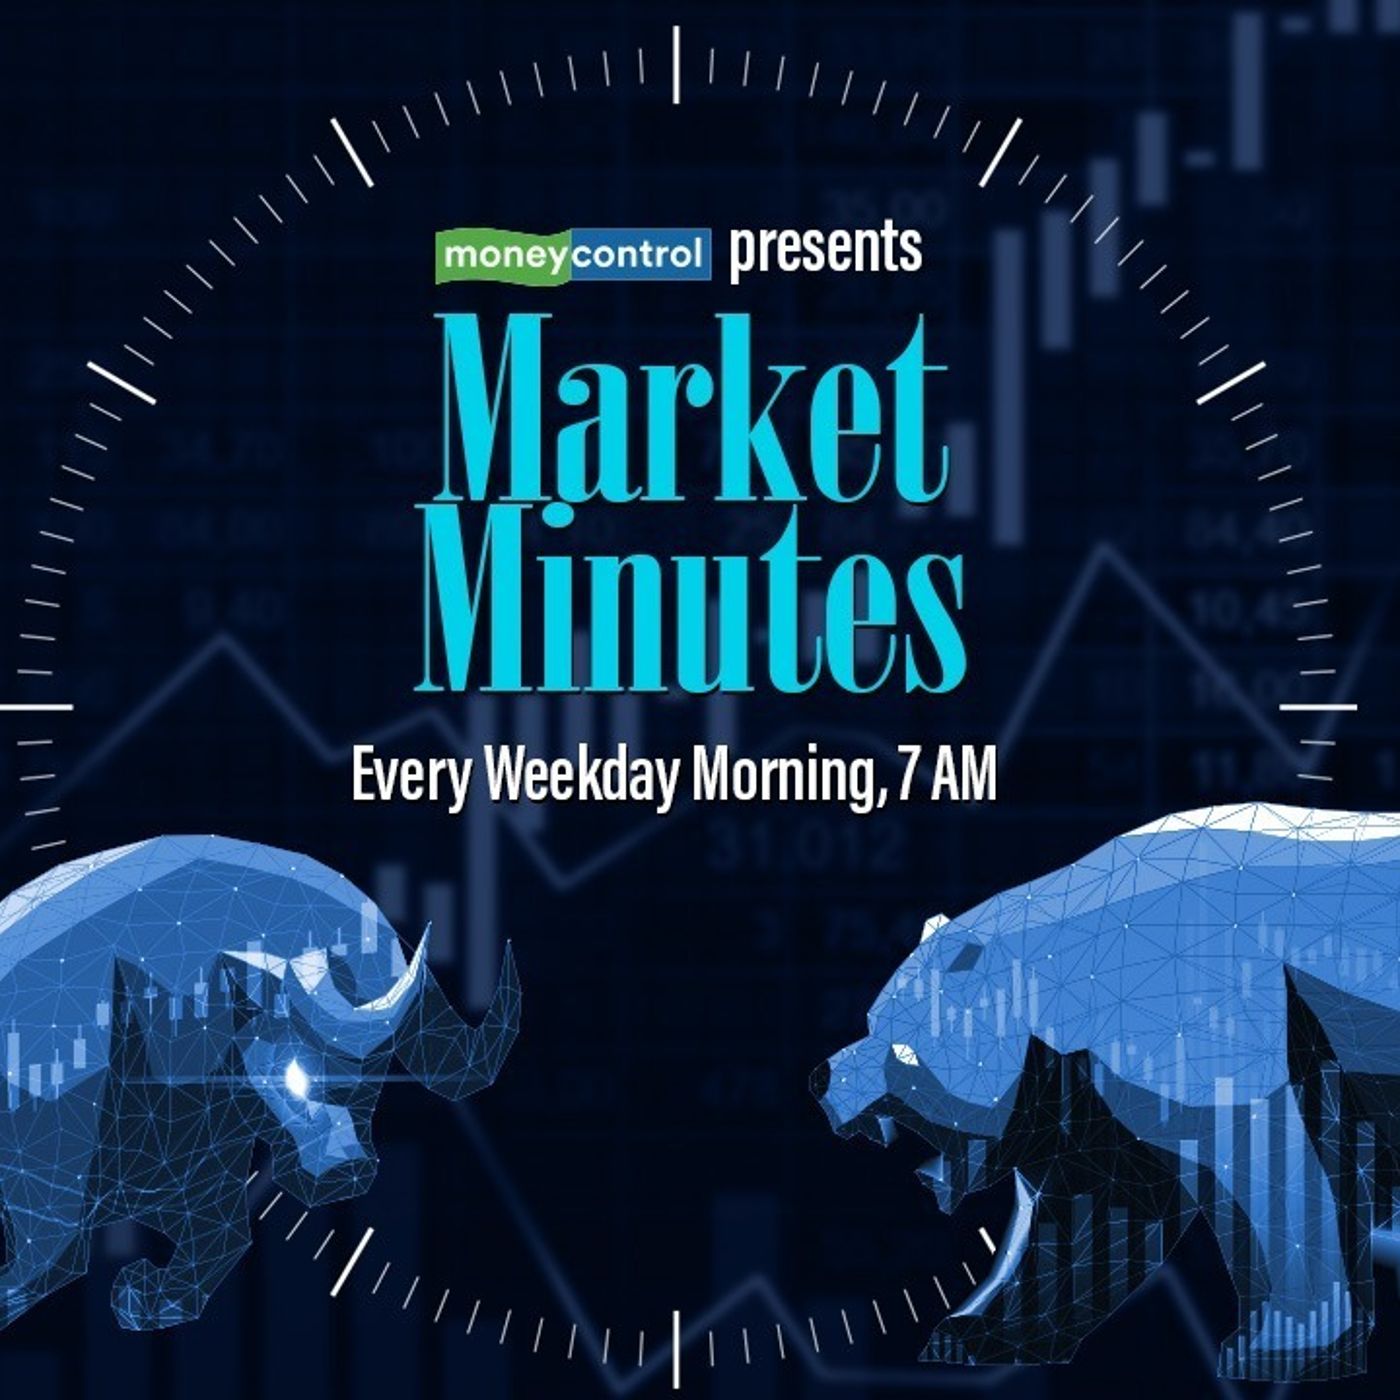 4191: Heavyweights drag Nifty as broader markets continue to bleed; benchmarks to stage a resurgence soon? | Market Minutes